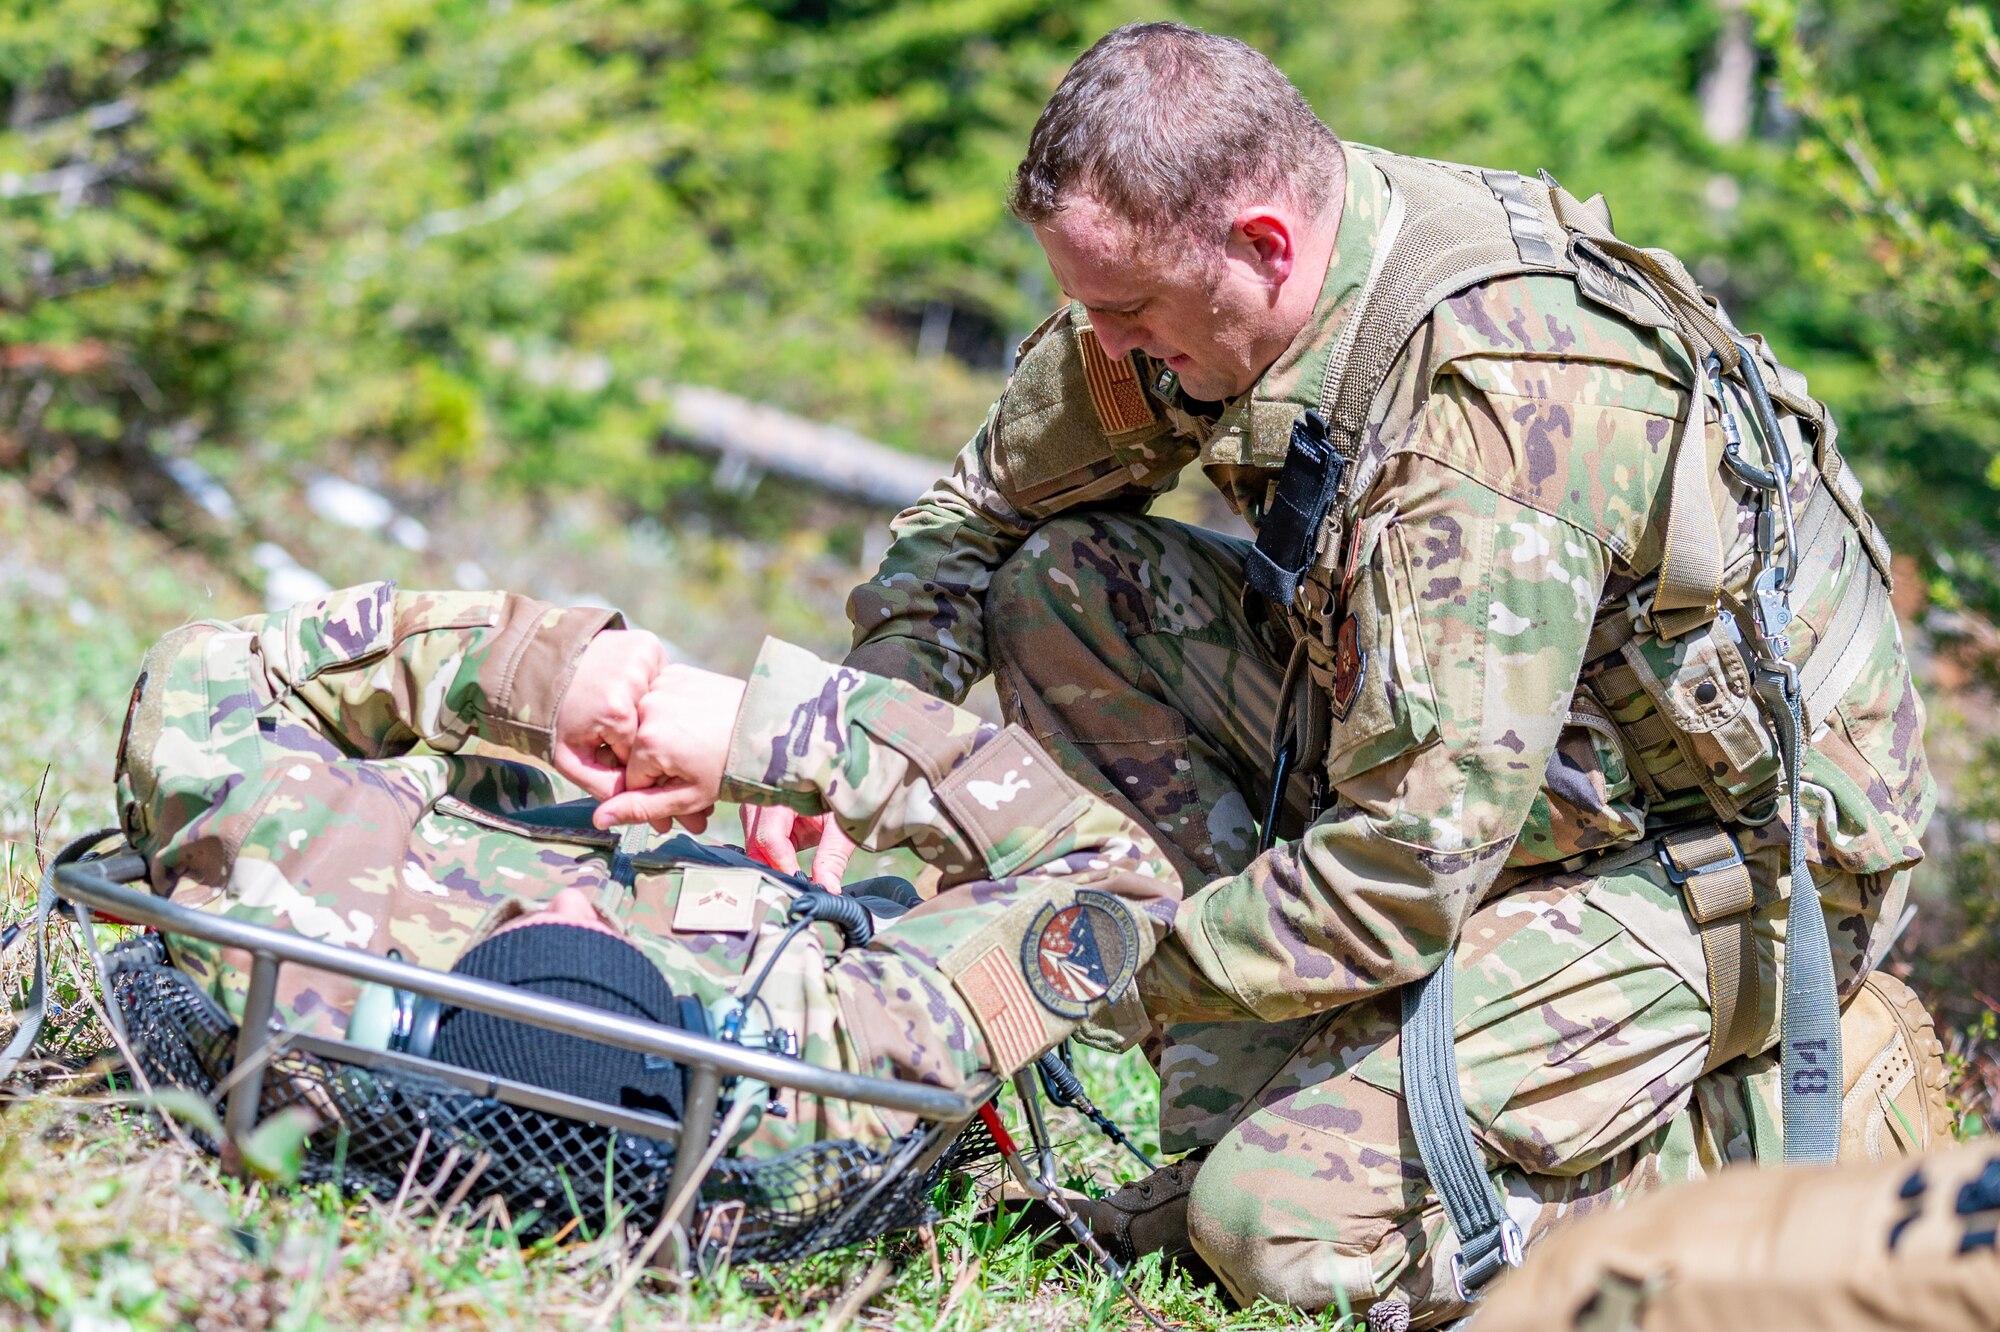 Capt. Noah Russell, 341st Operational Medical Readiness Squadron flight medic, secures Airman 1st Class Courage Krueger, 341st Contracting Squadron contracting apprentice, into a stokes litter during a search and rescue exercise May 24, 2022, over the Highwood Mountains near Great Falls, Mont.